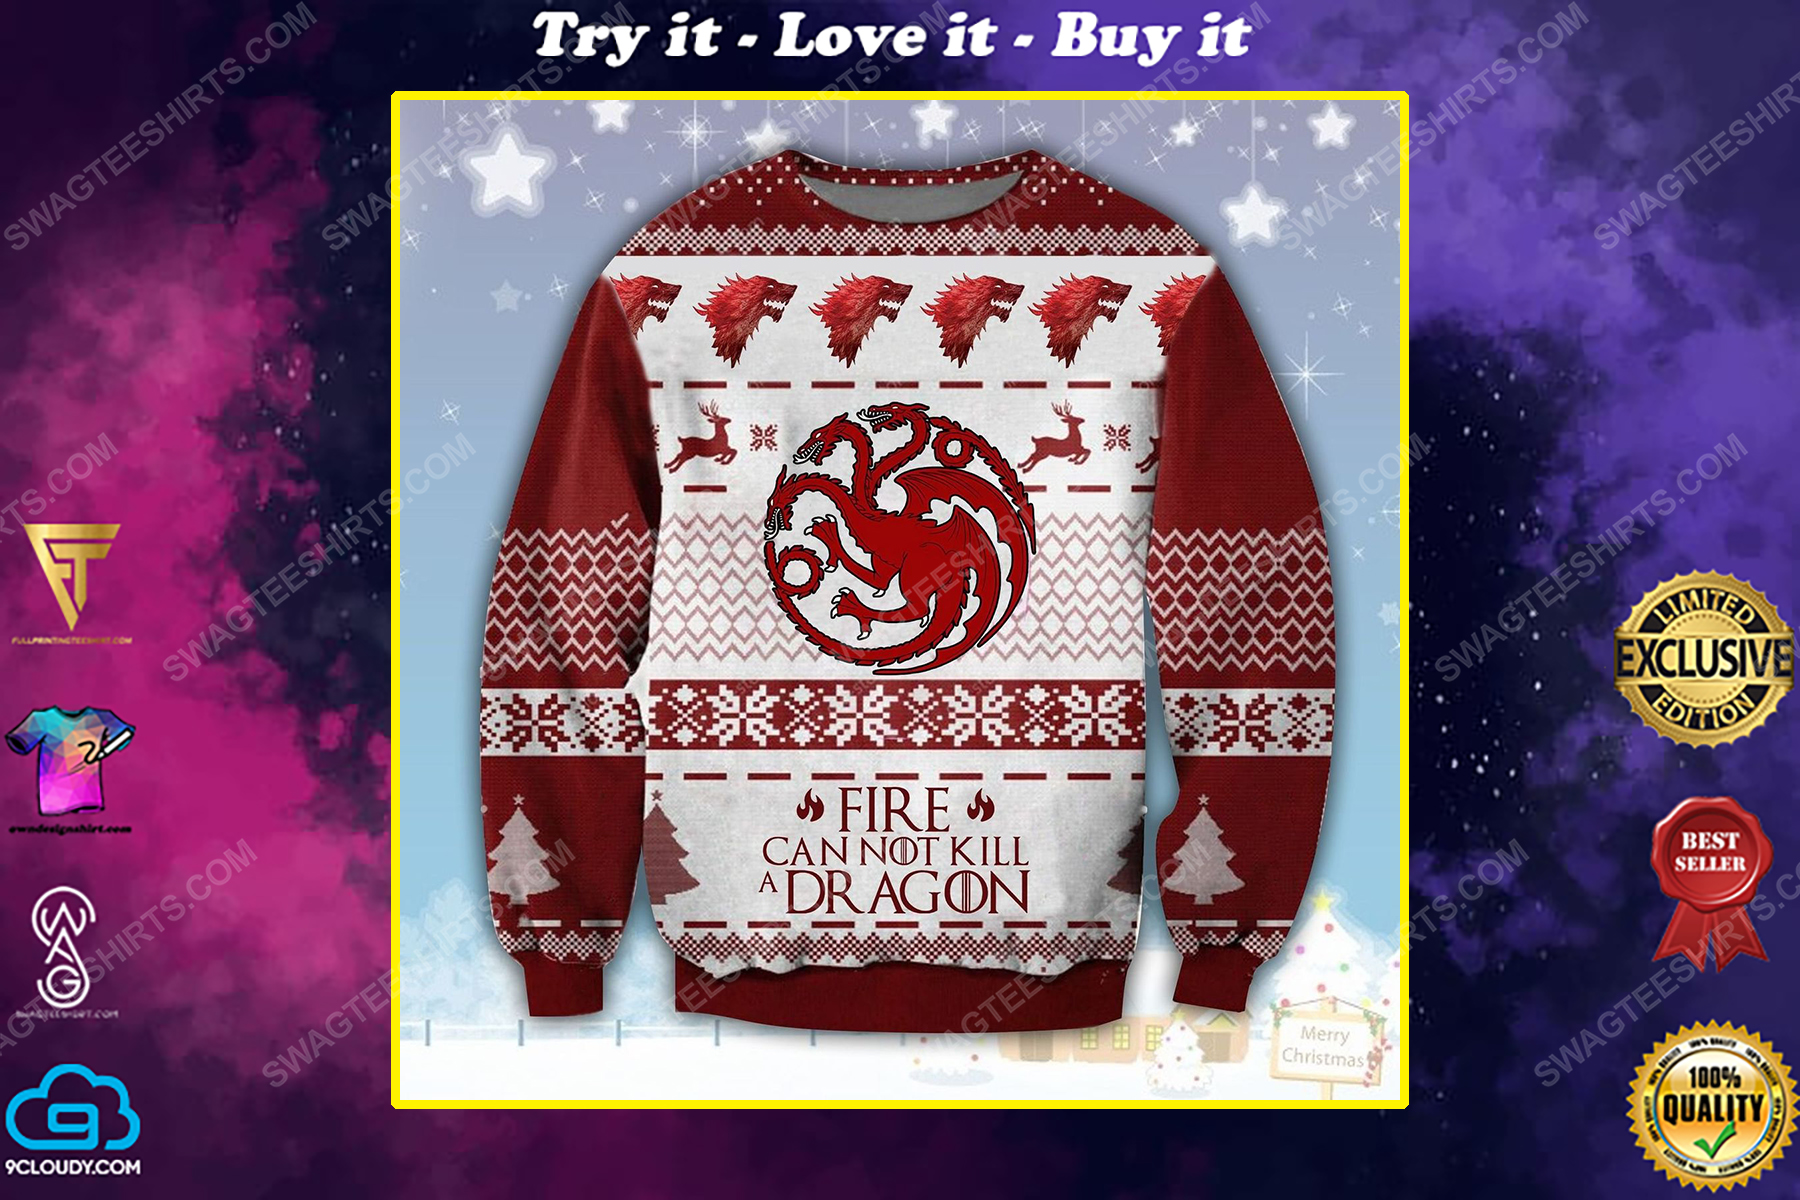 Fire cannot kill a dragon game of thrones ​ugly christmas sweater 1